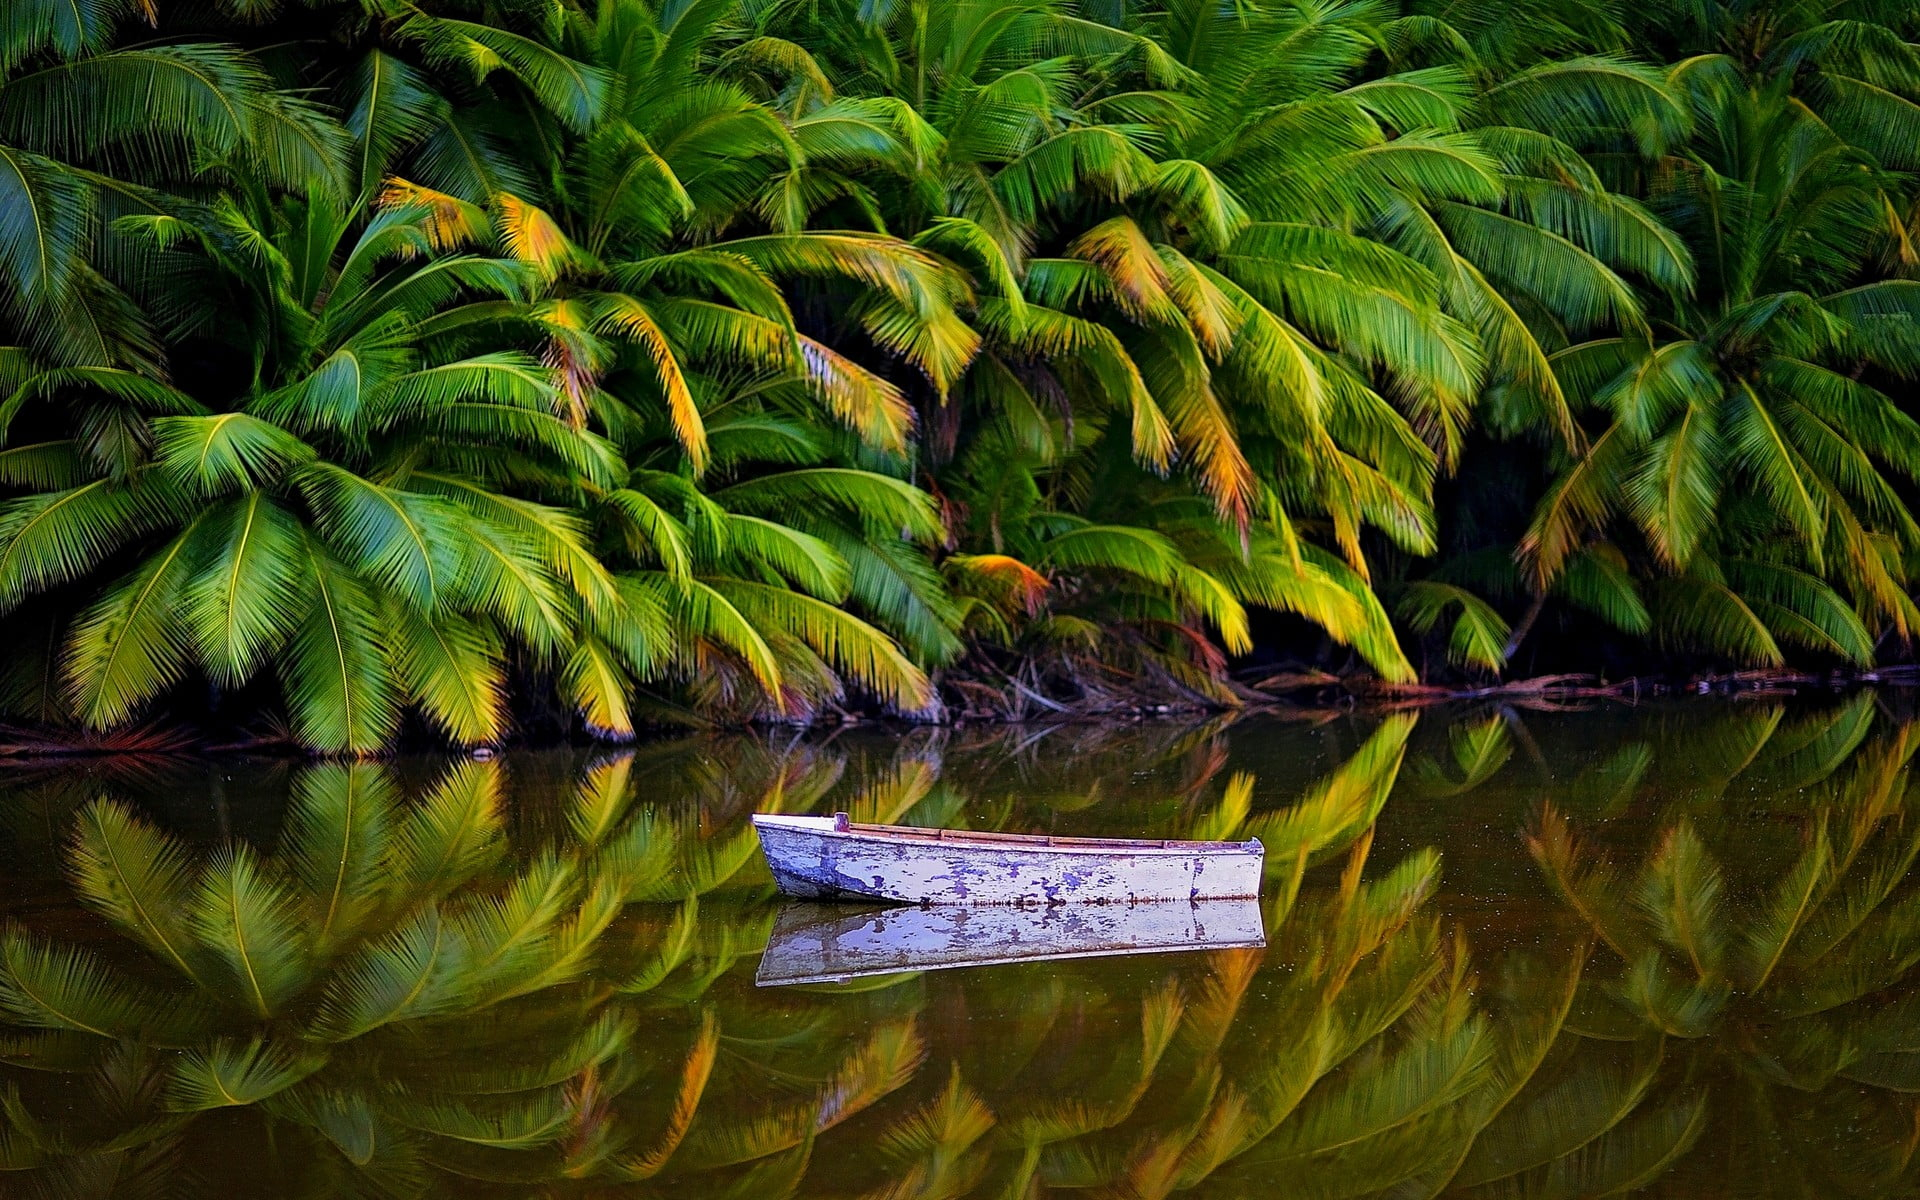 White boat on body of water, nature, landscape, palm trees, jungle wallpaper